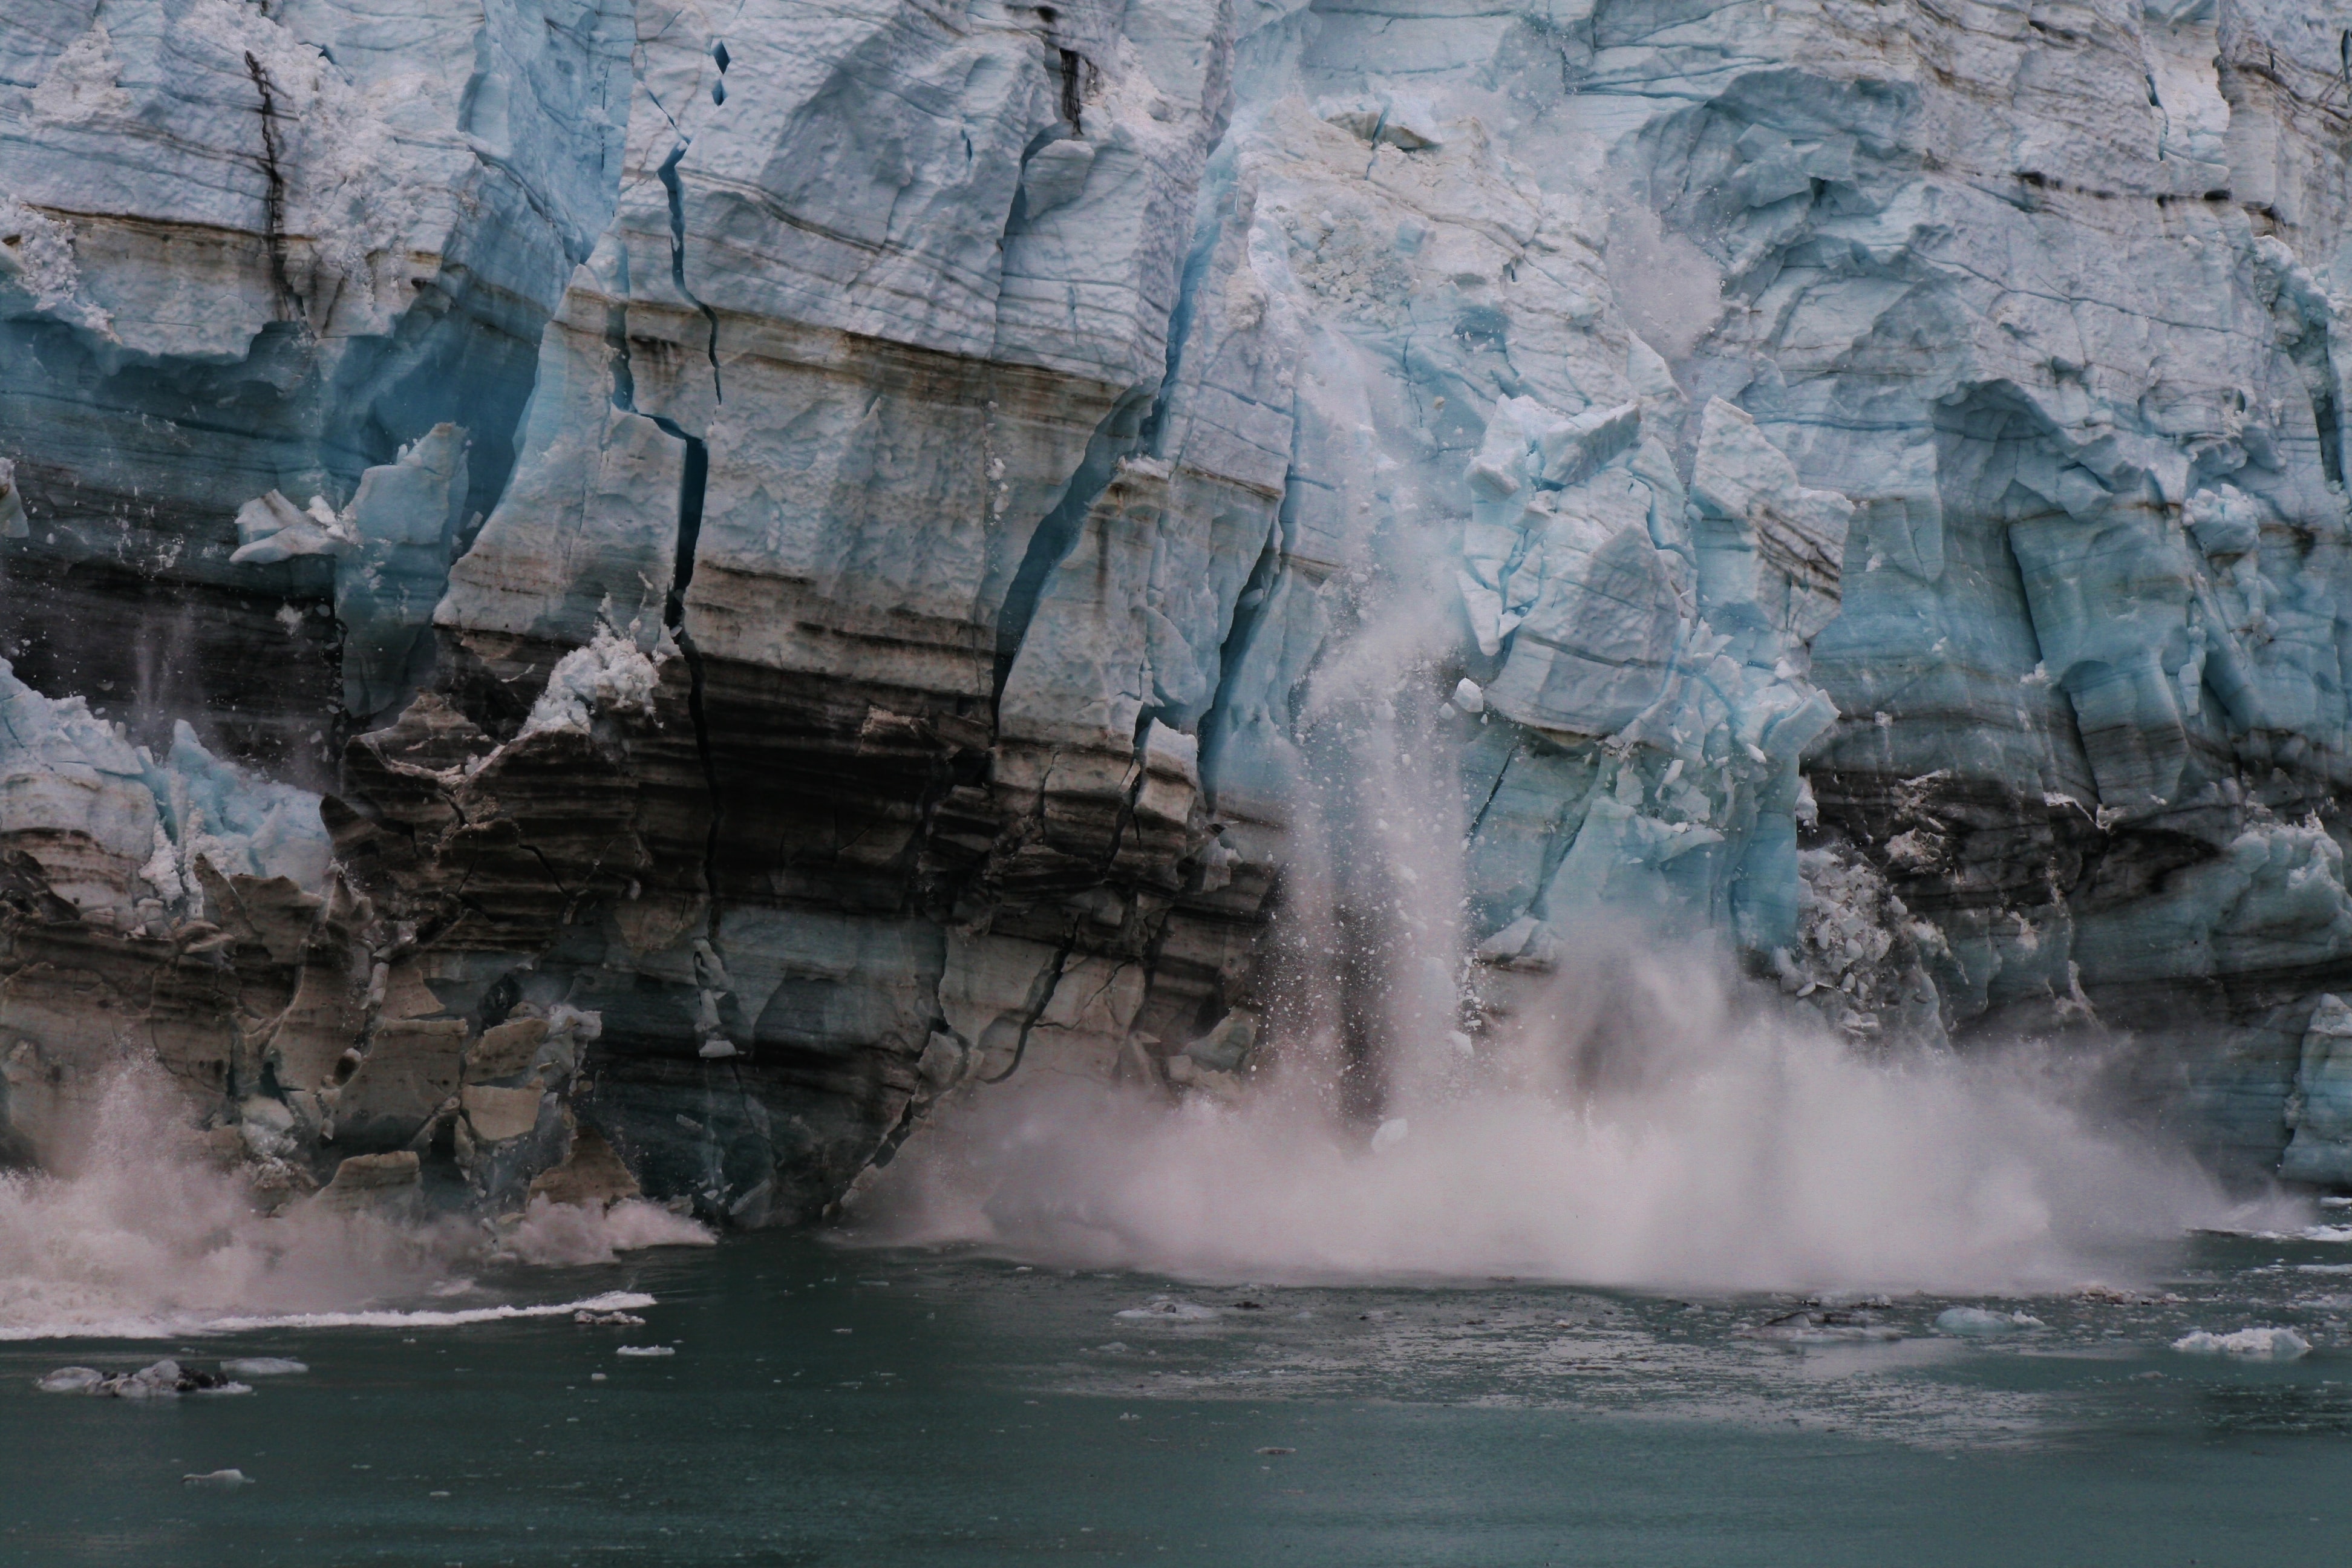 Glacier collapsing into the water